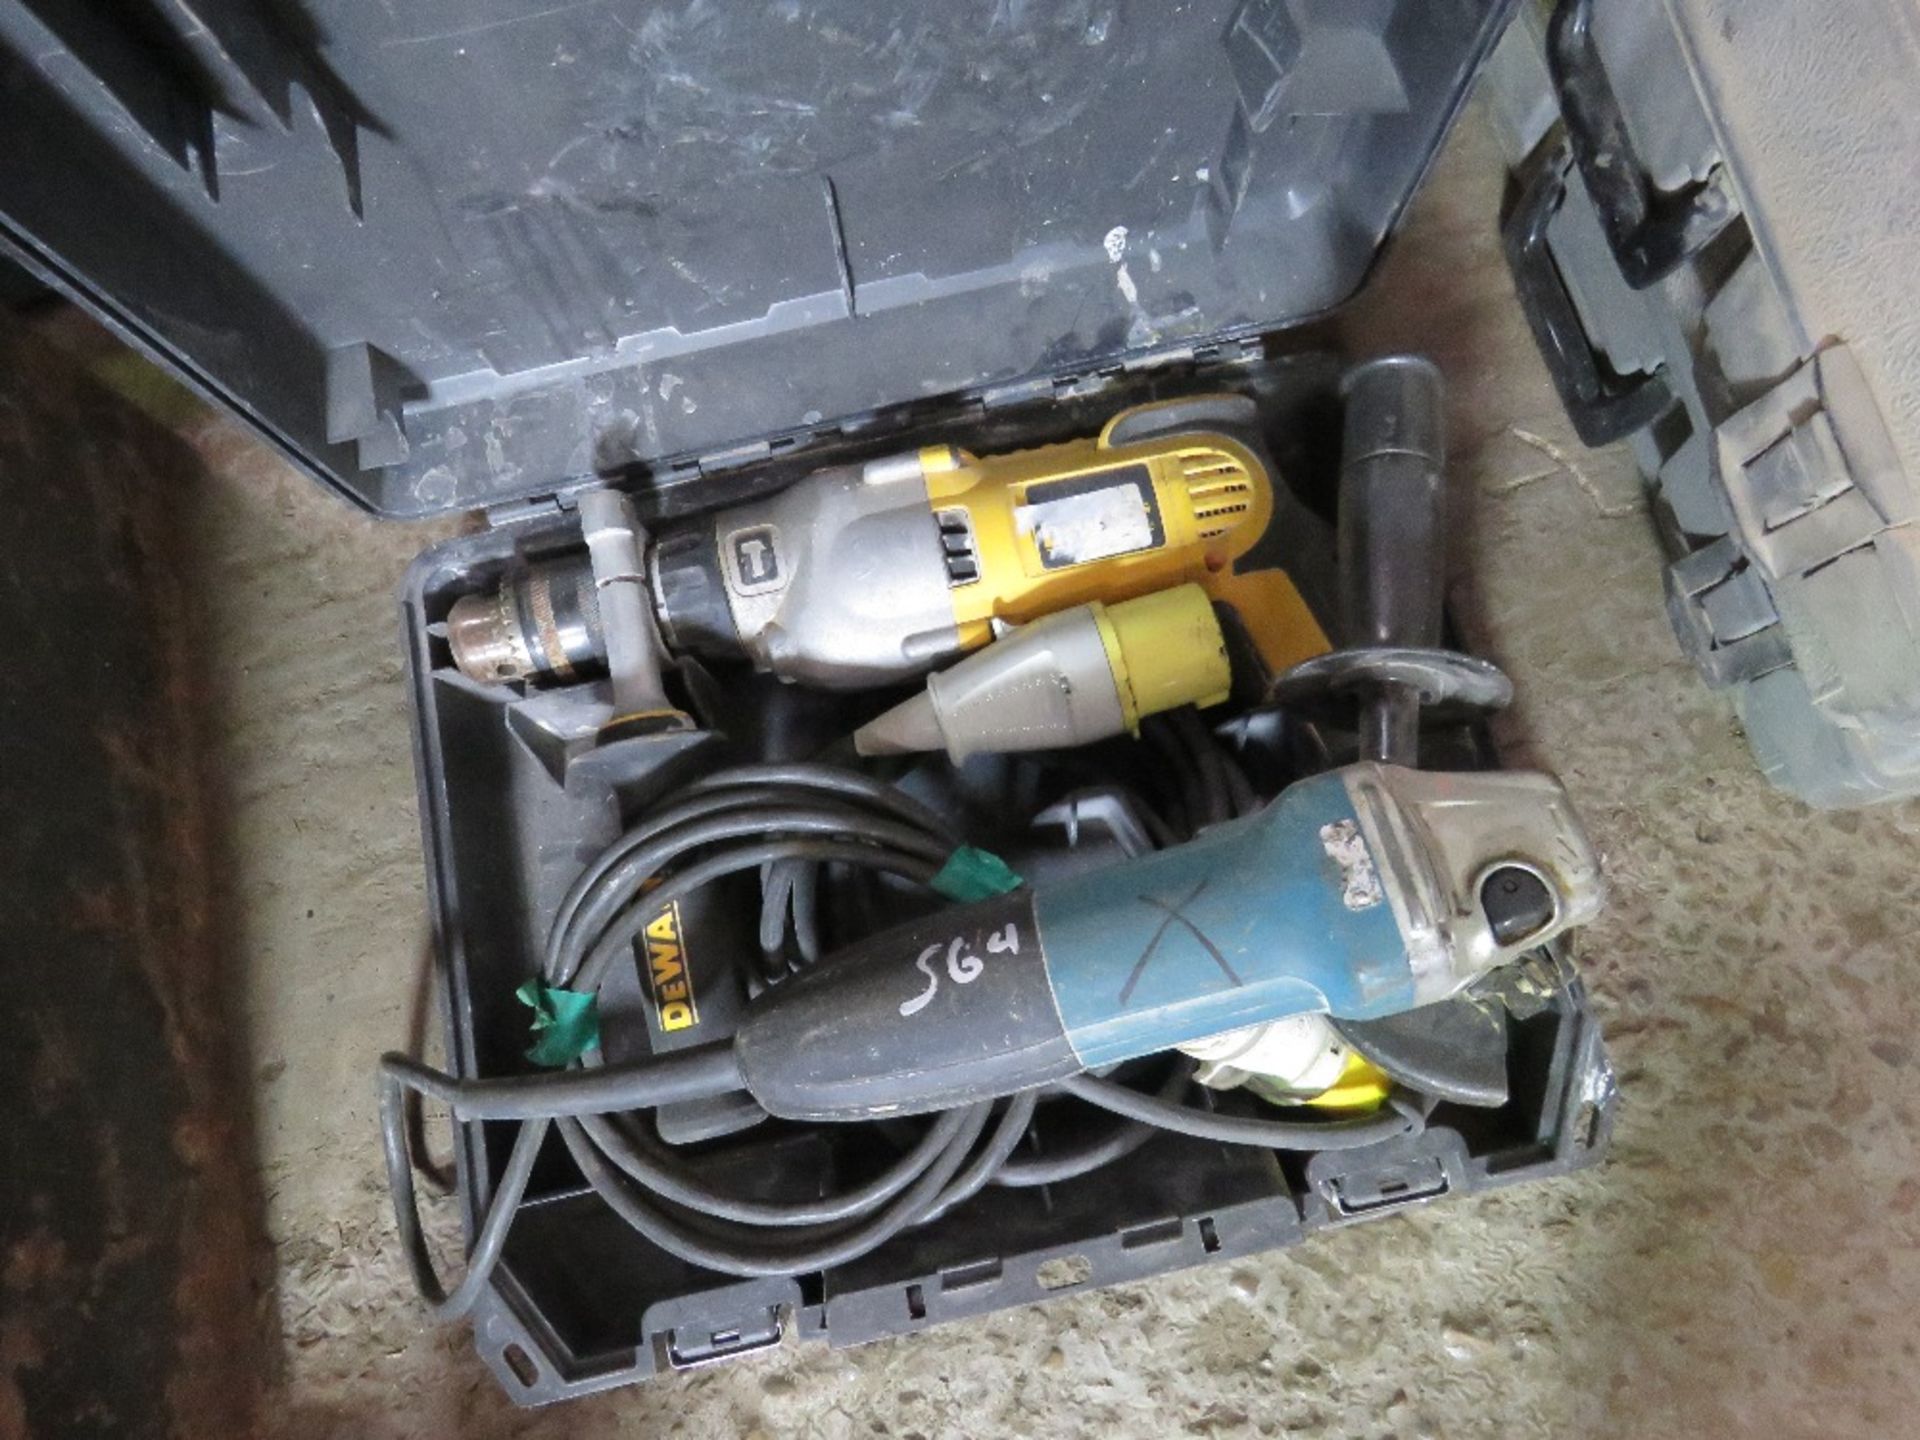 DEWALT DRILL AND A MAKITA GRINDER, 110VOLT.UNTESTED, CONDITION UNKNOWN.